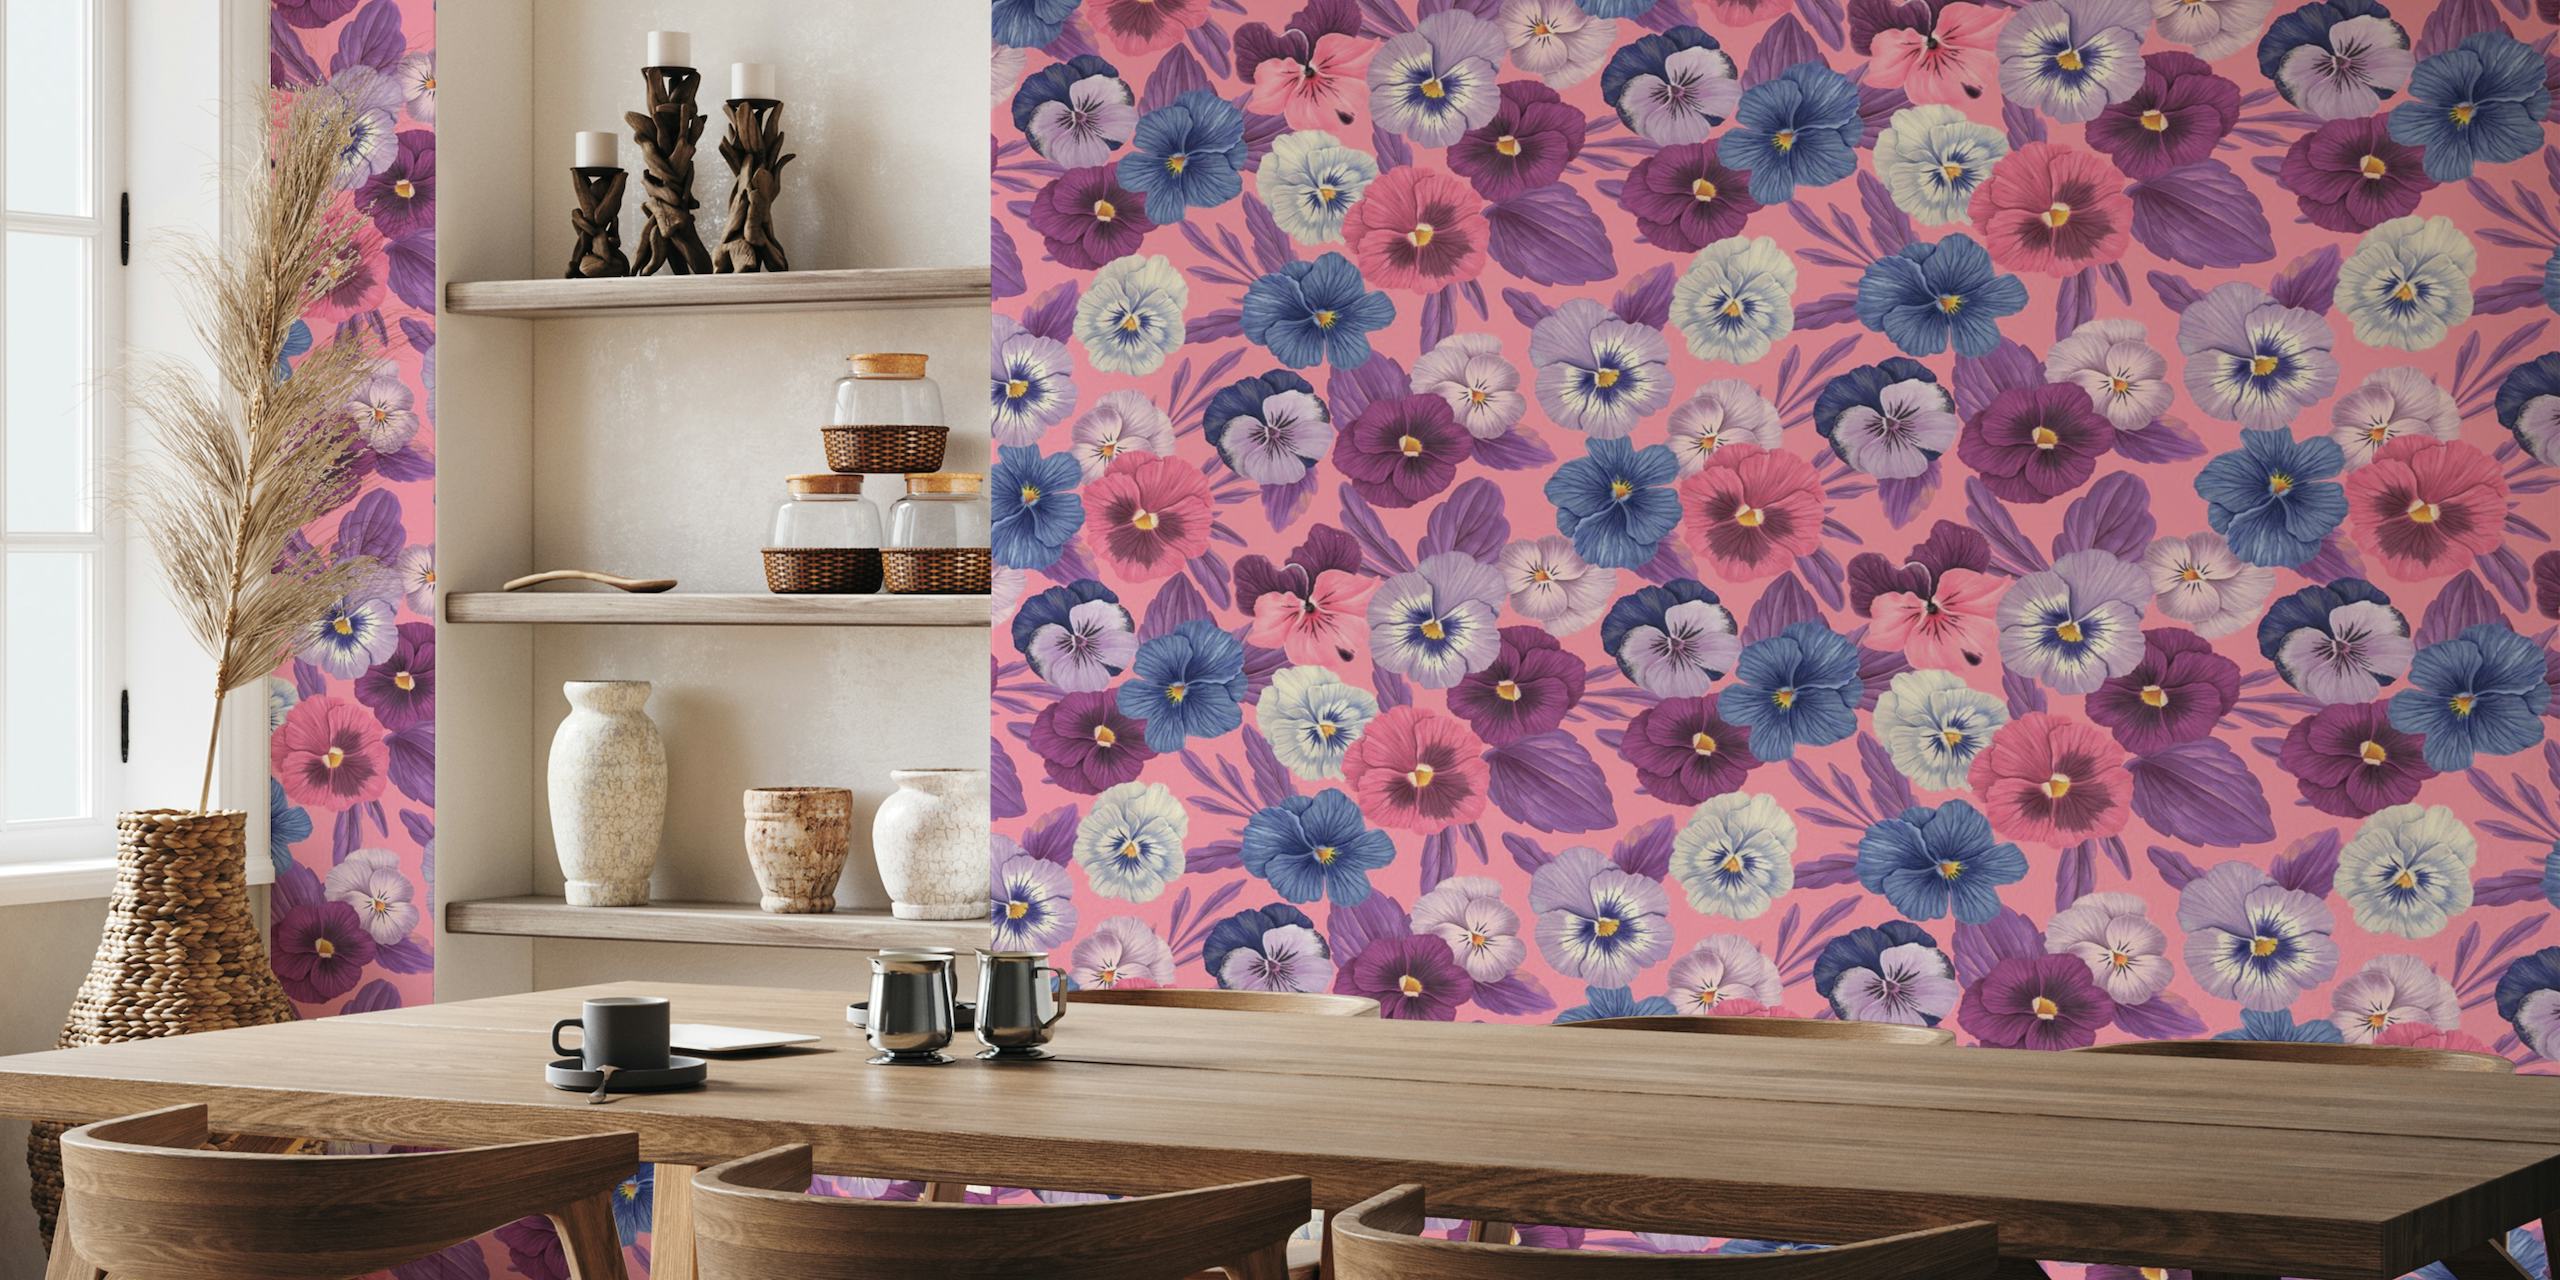 Colorful pansies on candy pink wallpaper